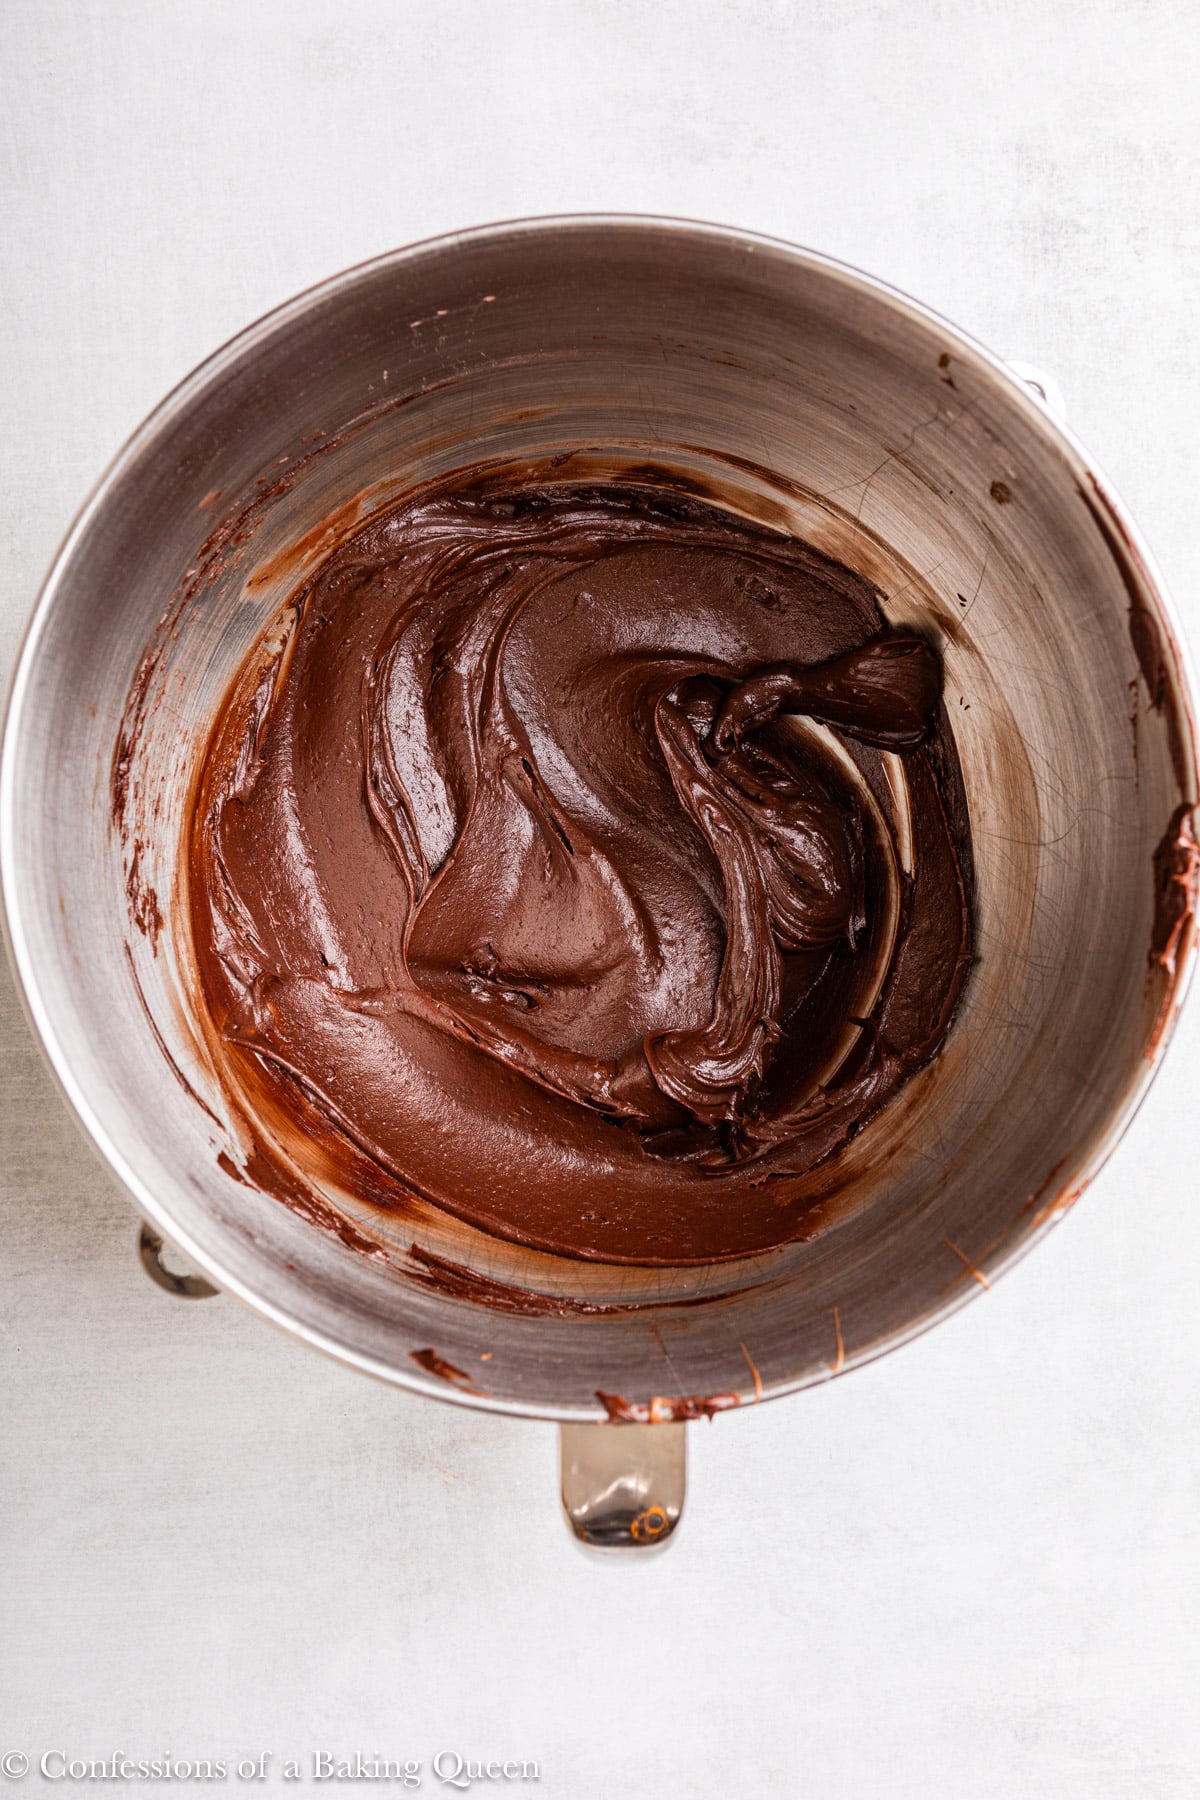 fudgy chocolate frosting in a large metal bowl on a light grey surface.